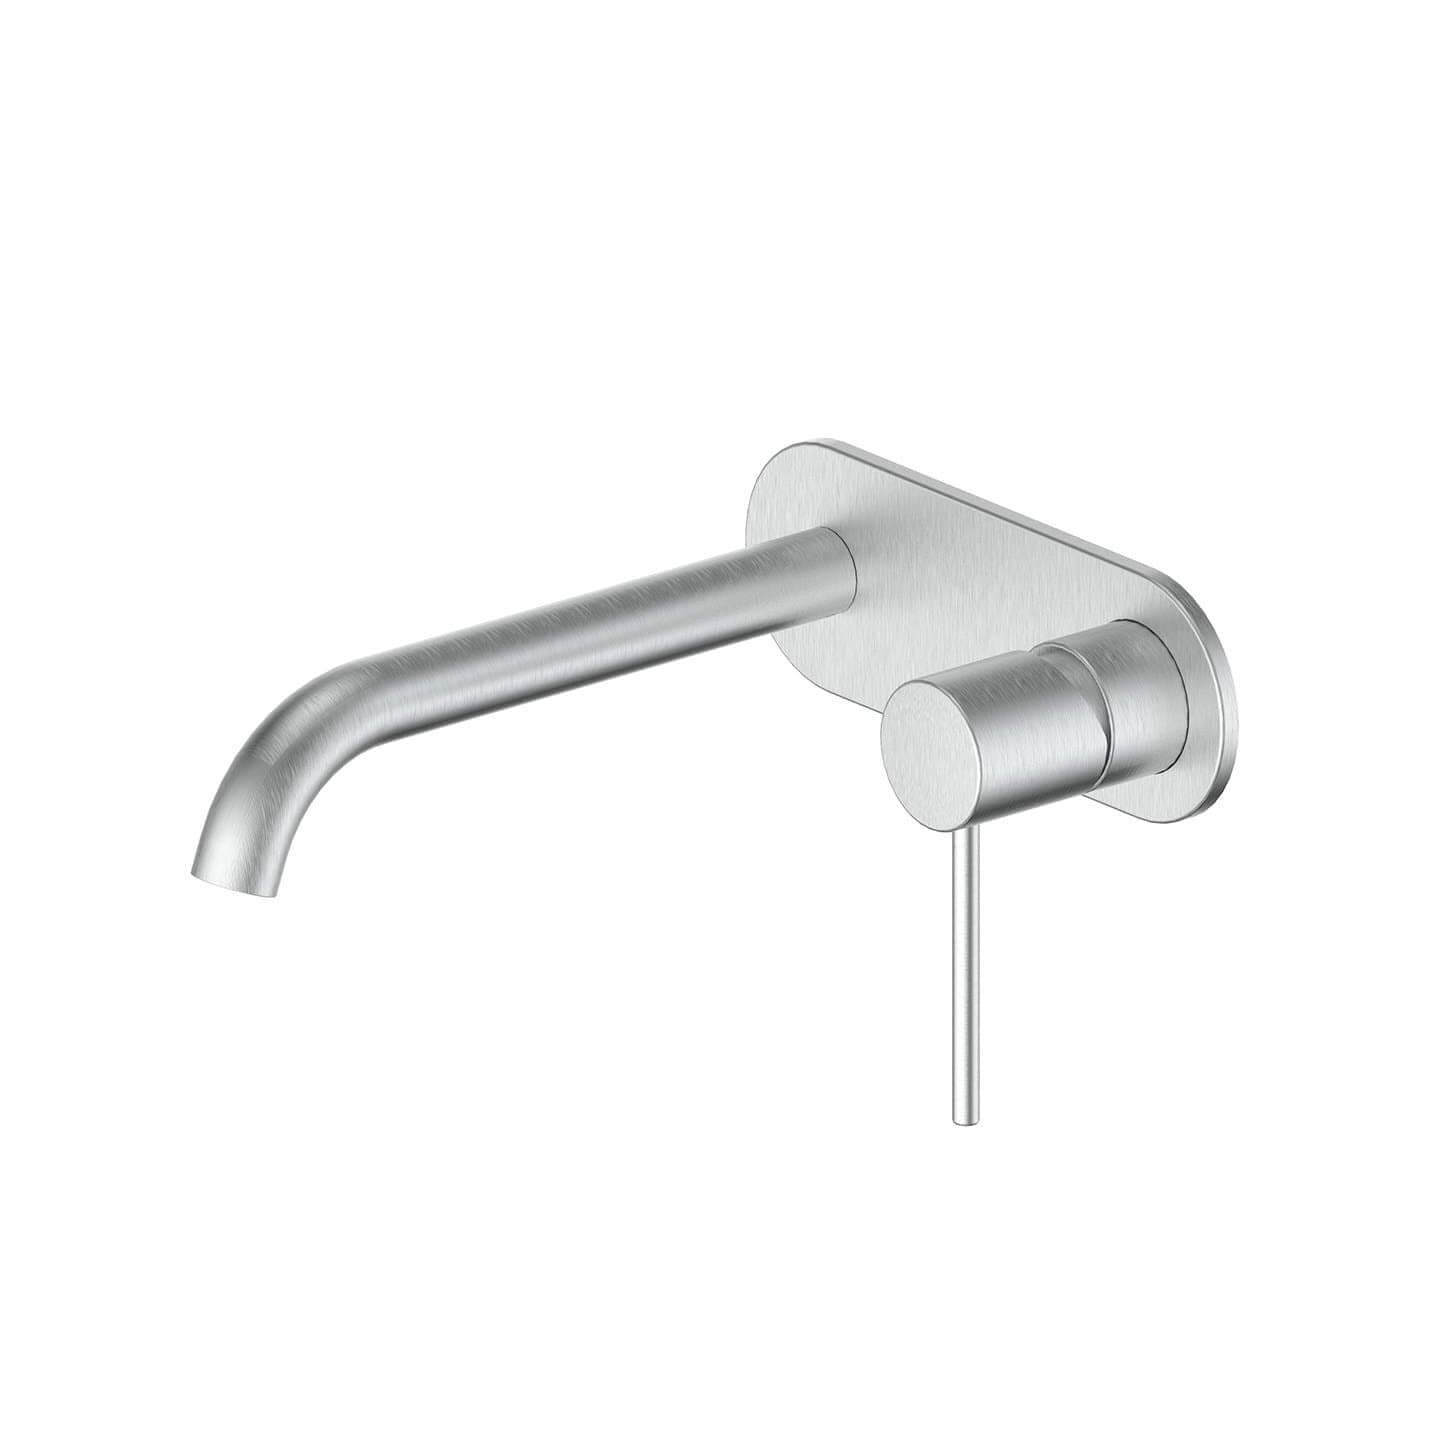 GREENS GISELLE WALL BASIN MIXER WITH FACEPLATE